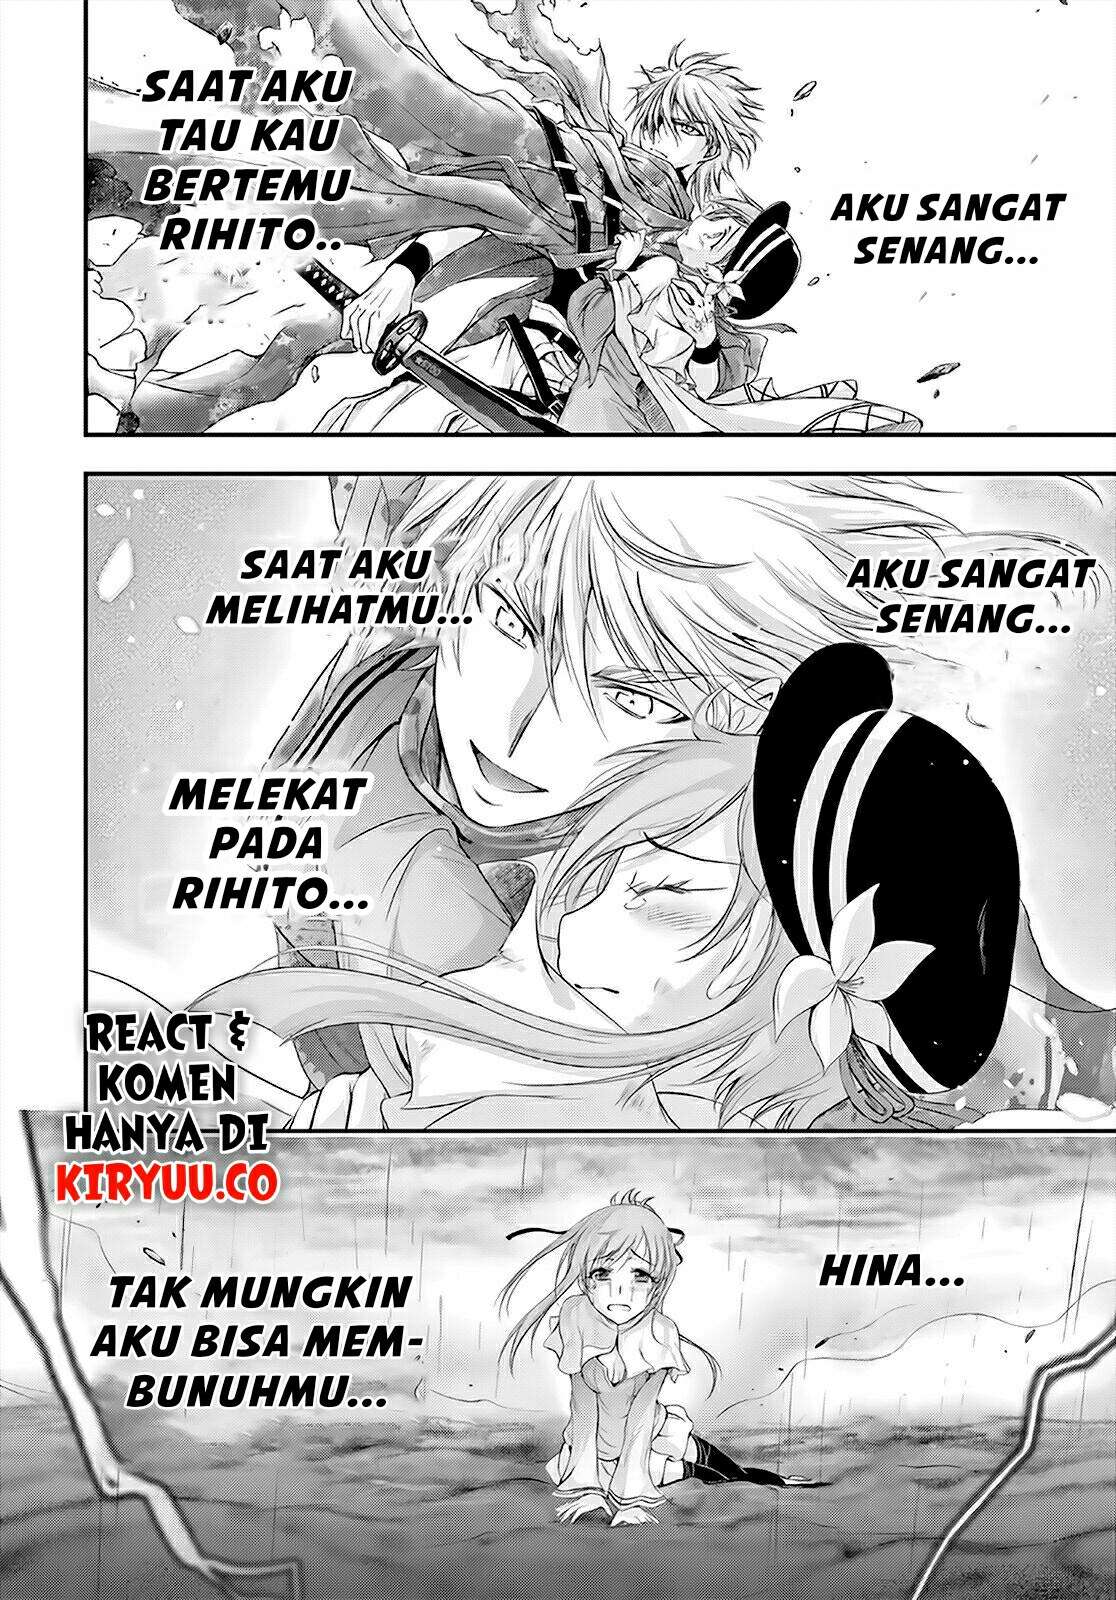 Plunderer Chapter 68 Bahasa Indonesia